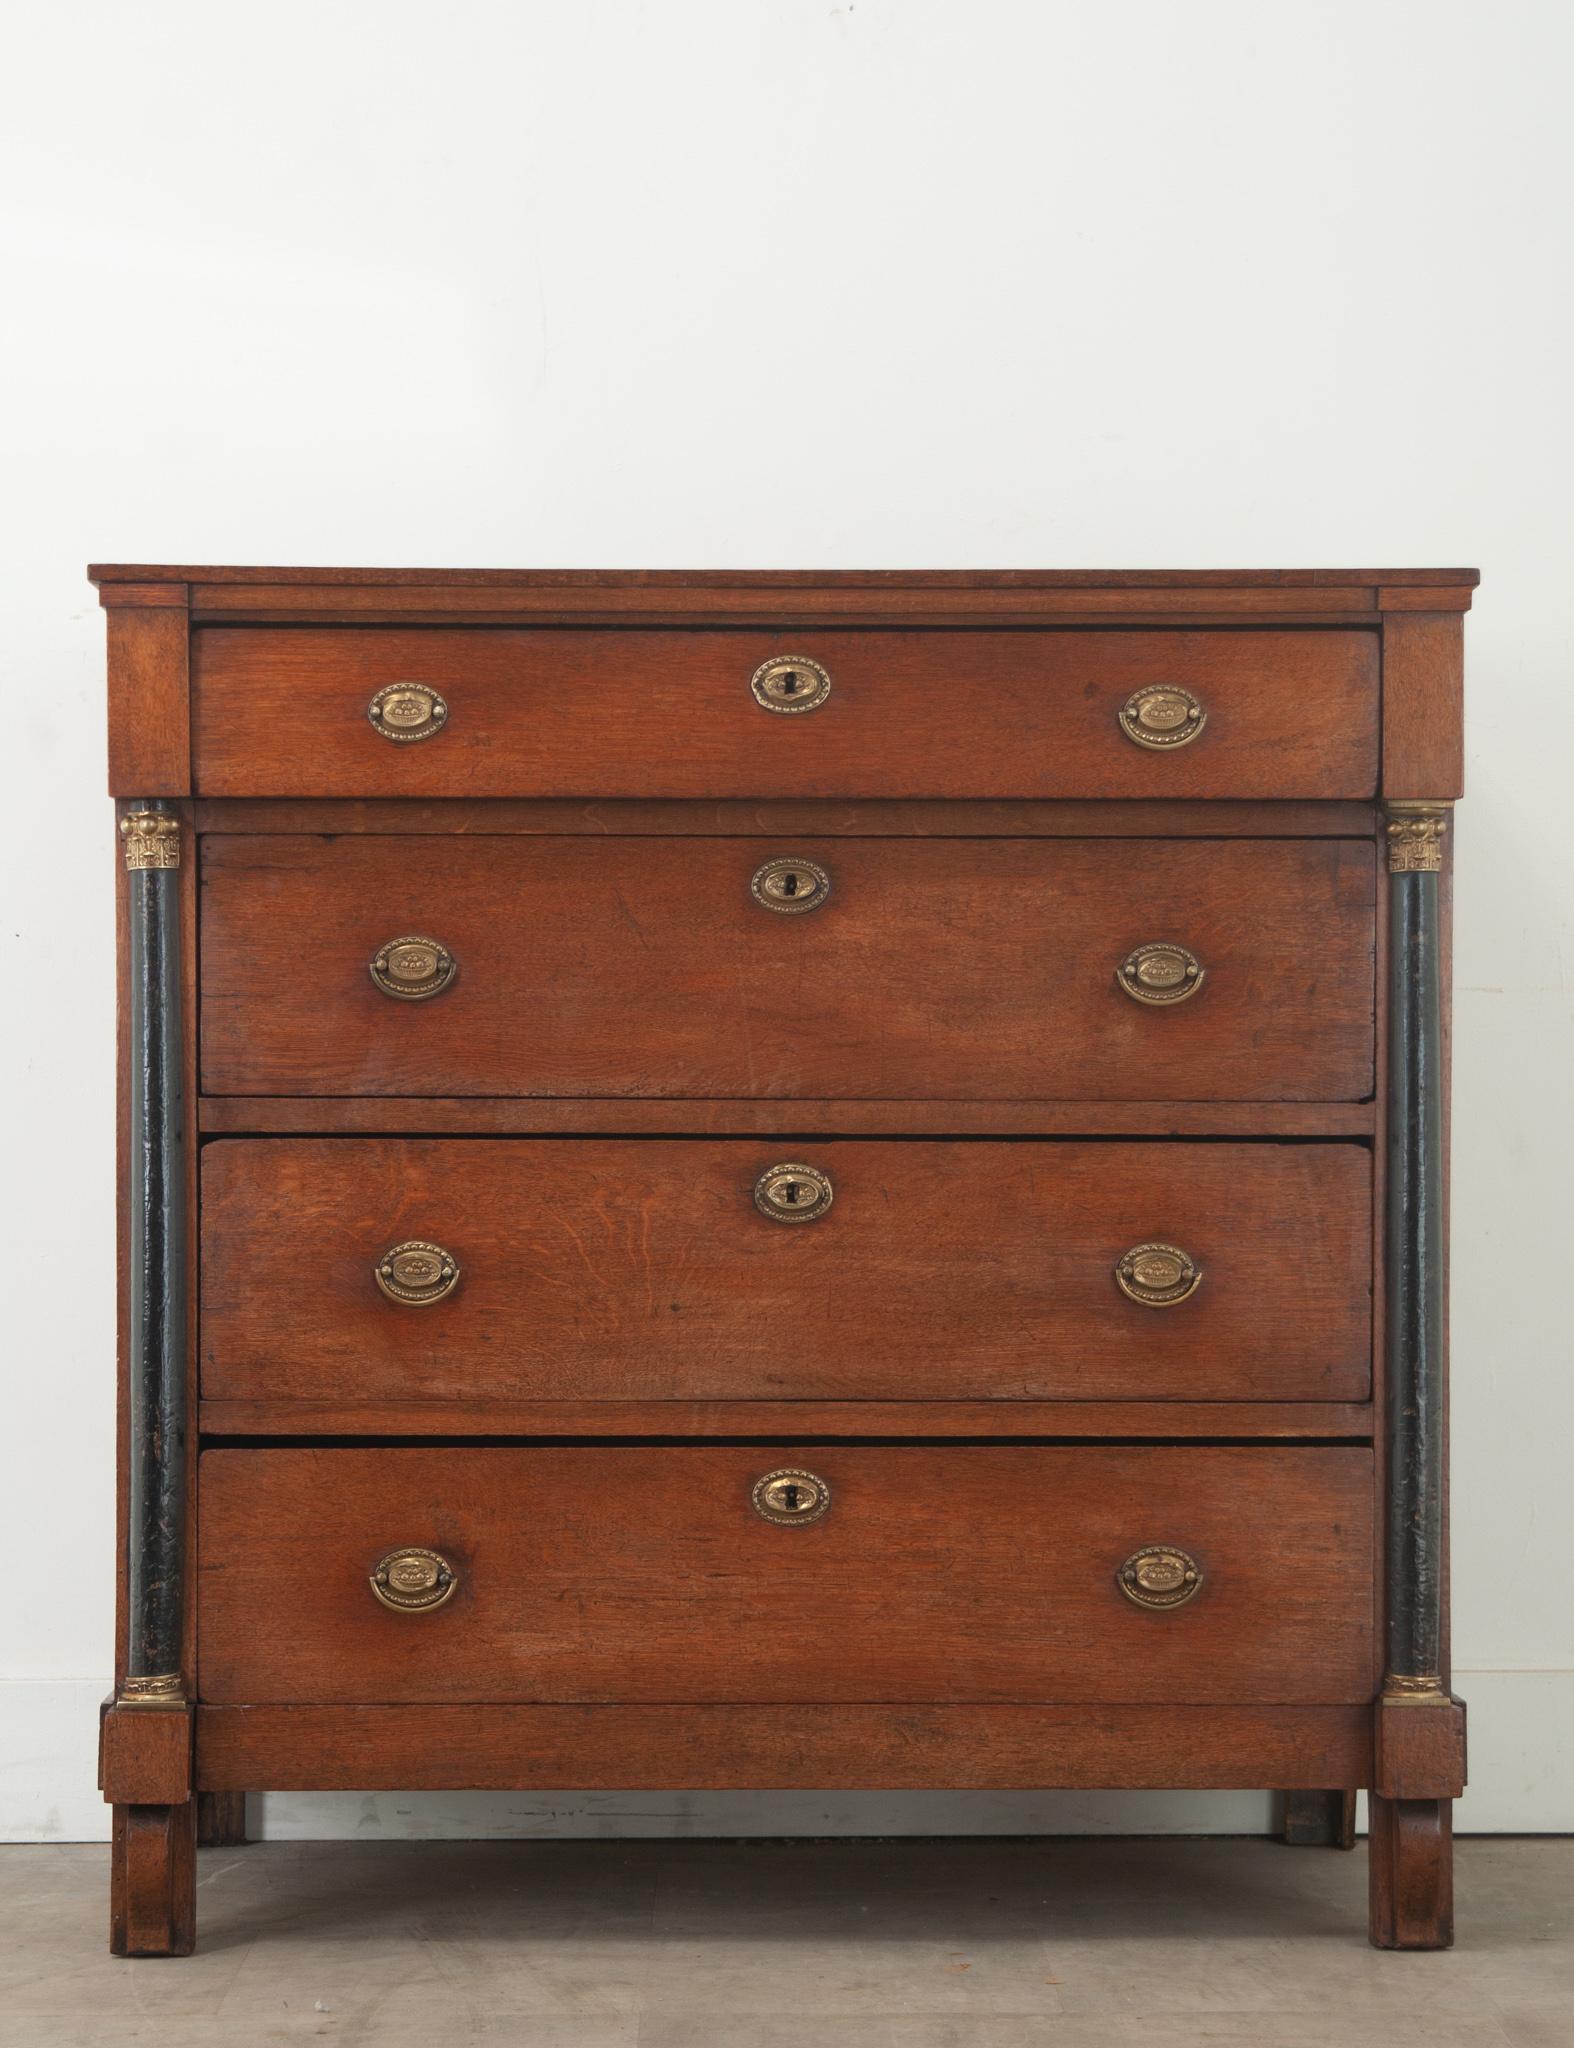 A classic Dutch Empire chest made of oak during the 1800’s. The top drawer protrudes forward over three drawers flaked with ebonized columns featuring brass capitals at the top and bases. All the drawers have brass escutcheon plates and ring pulls,